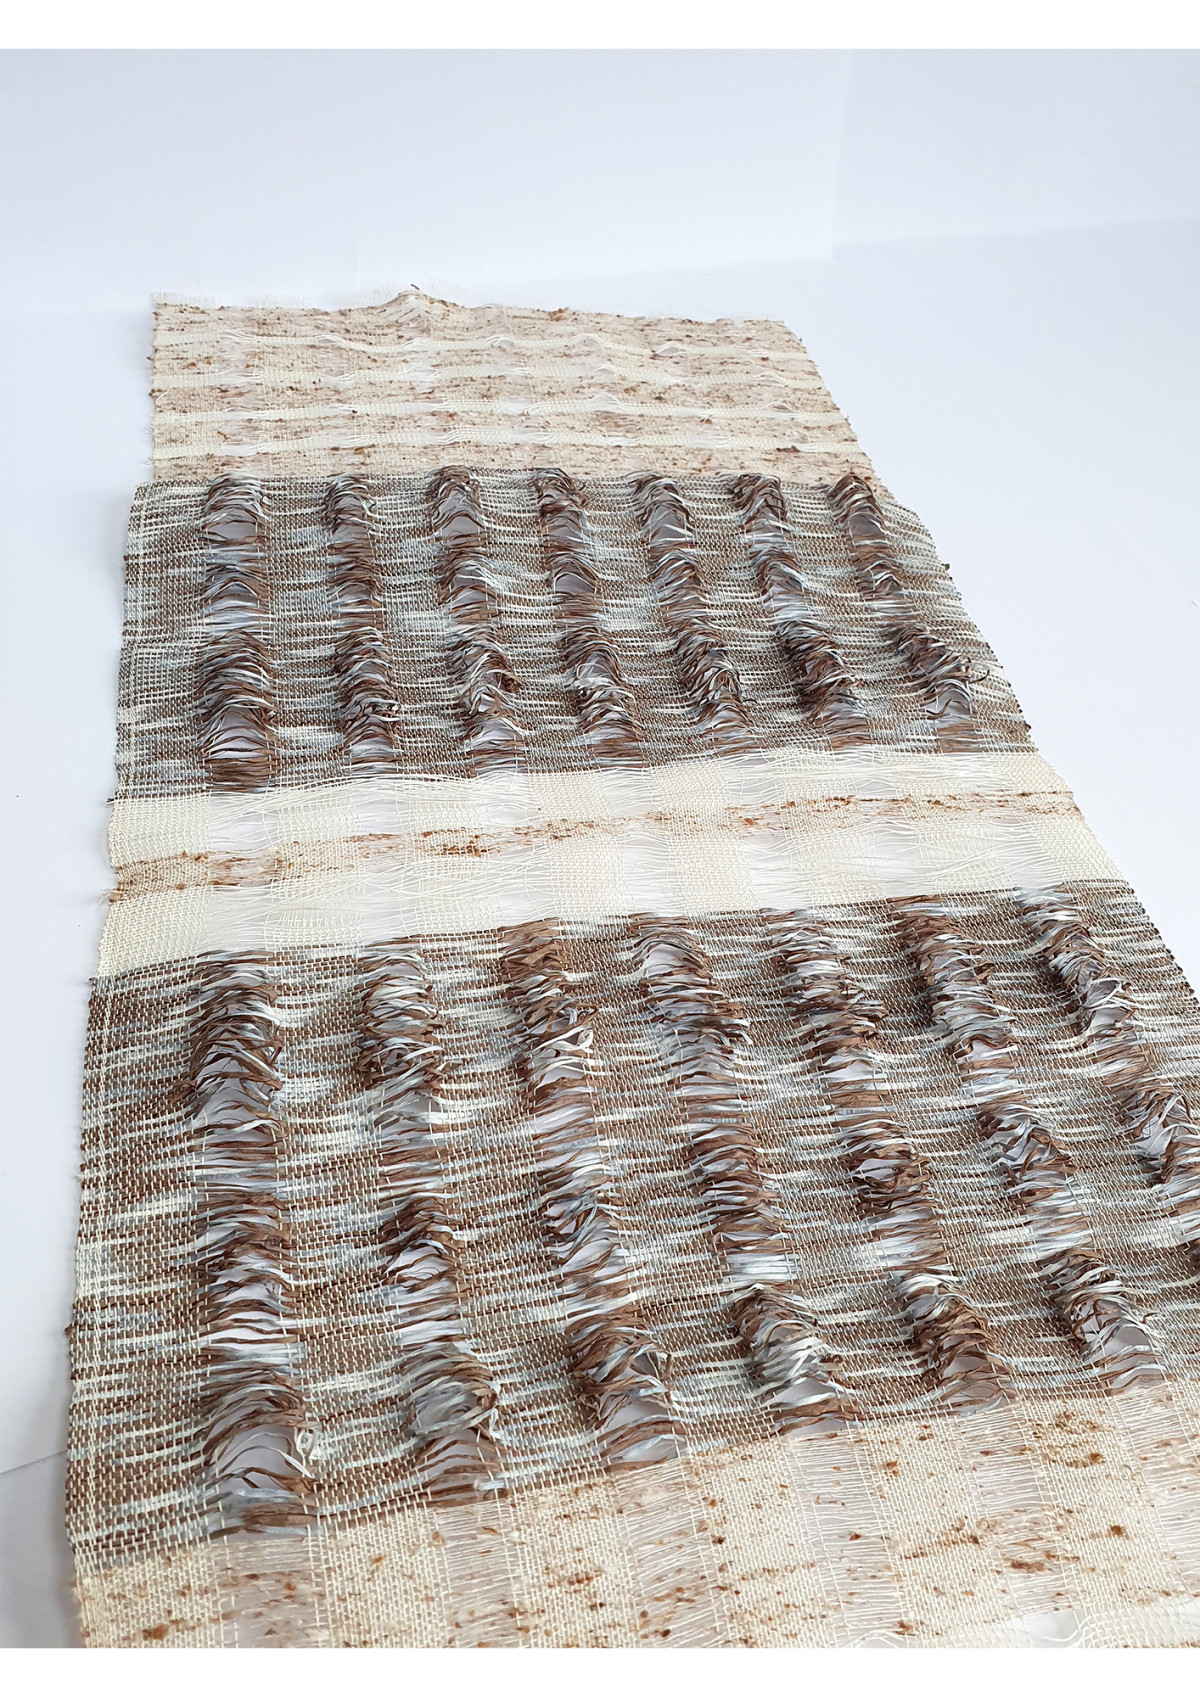 Woven fabric with Buckthorn dyed silk and paper contrasting with fine white paper and raw silk